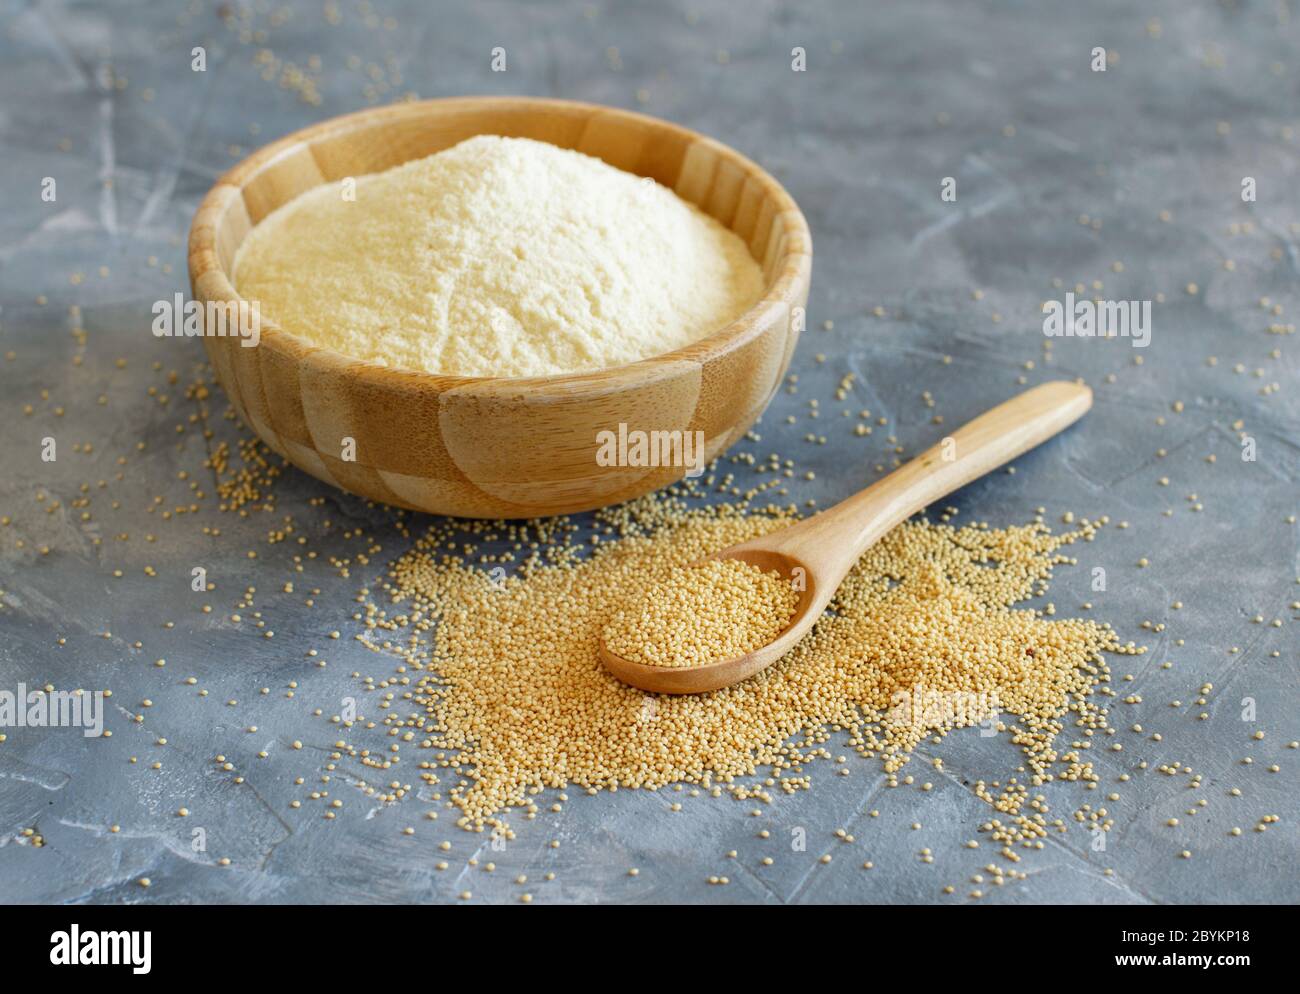 Bowl of raw Amaranth flour with a spoon of Amaranth seeds close up Stock Photo